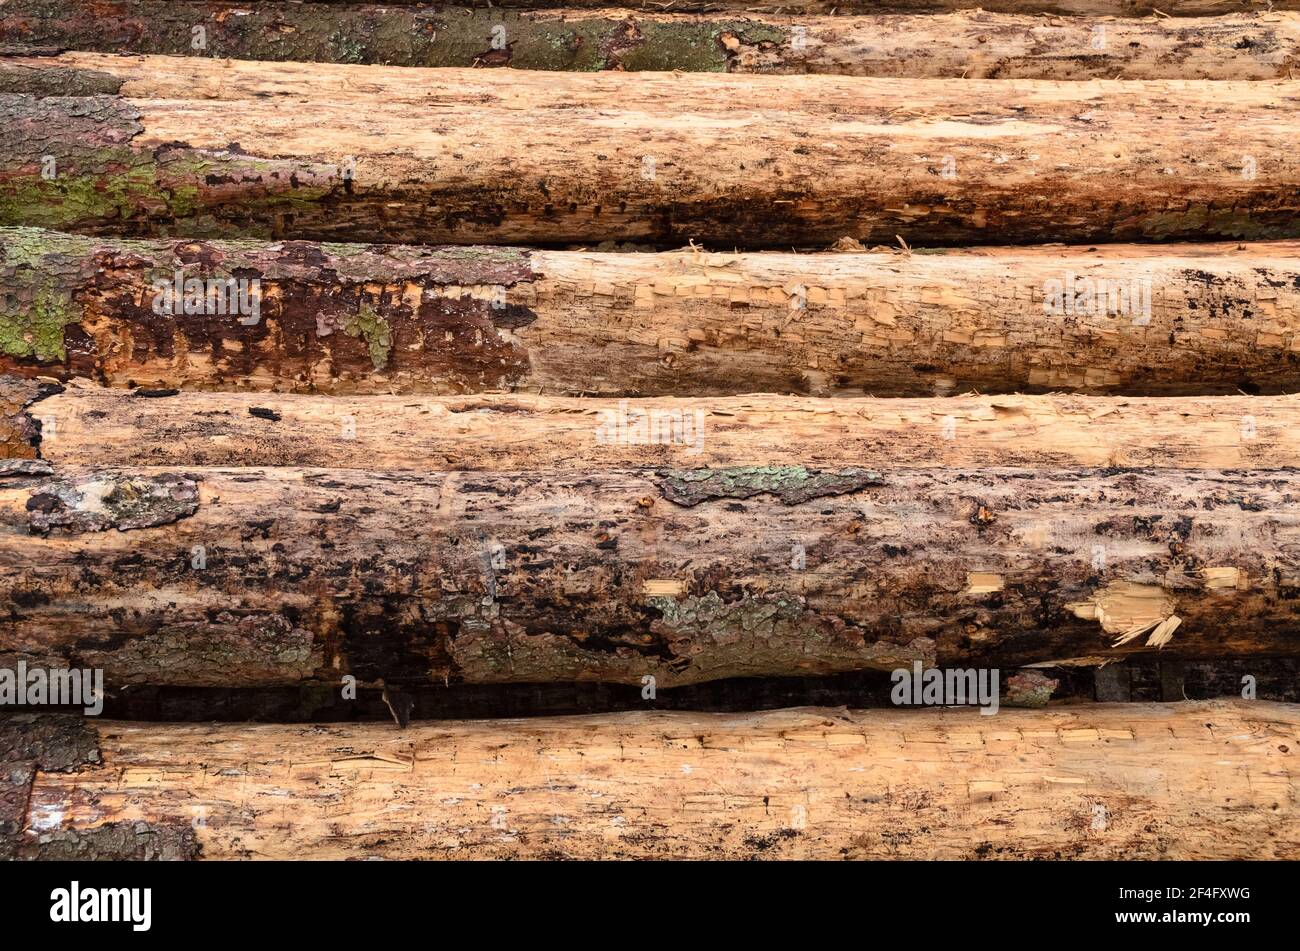 Side view of a pile of felled trees at a lumberyard or logging site, many log trunks, stack of wood logs in the forest, deforestation, Germany, Europe Stock Photo